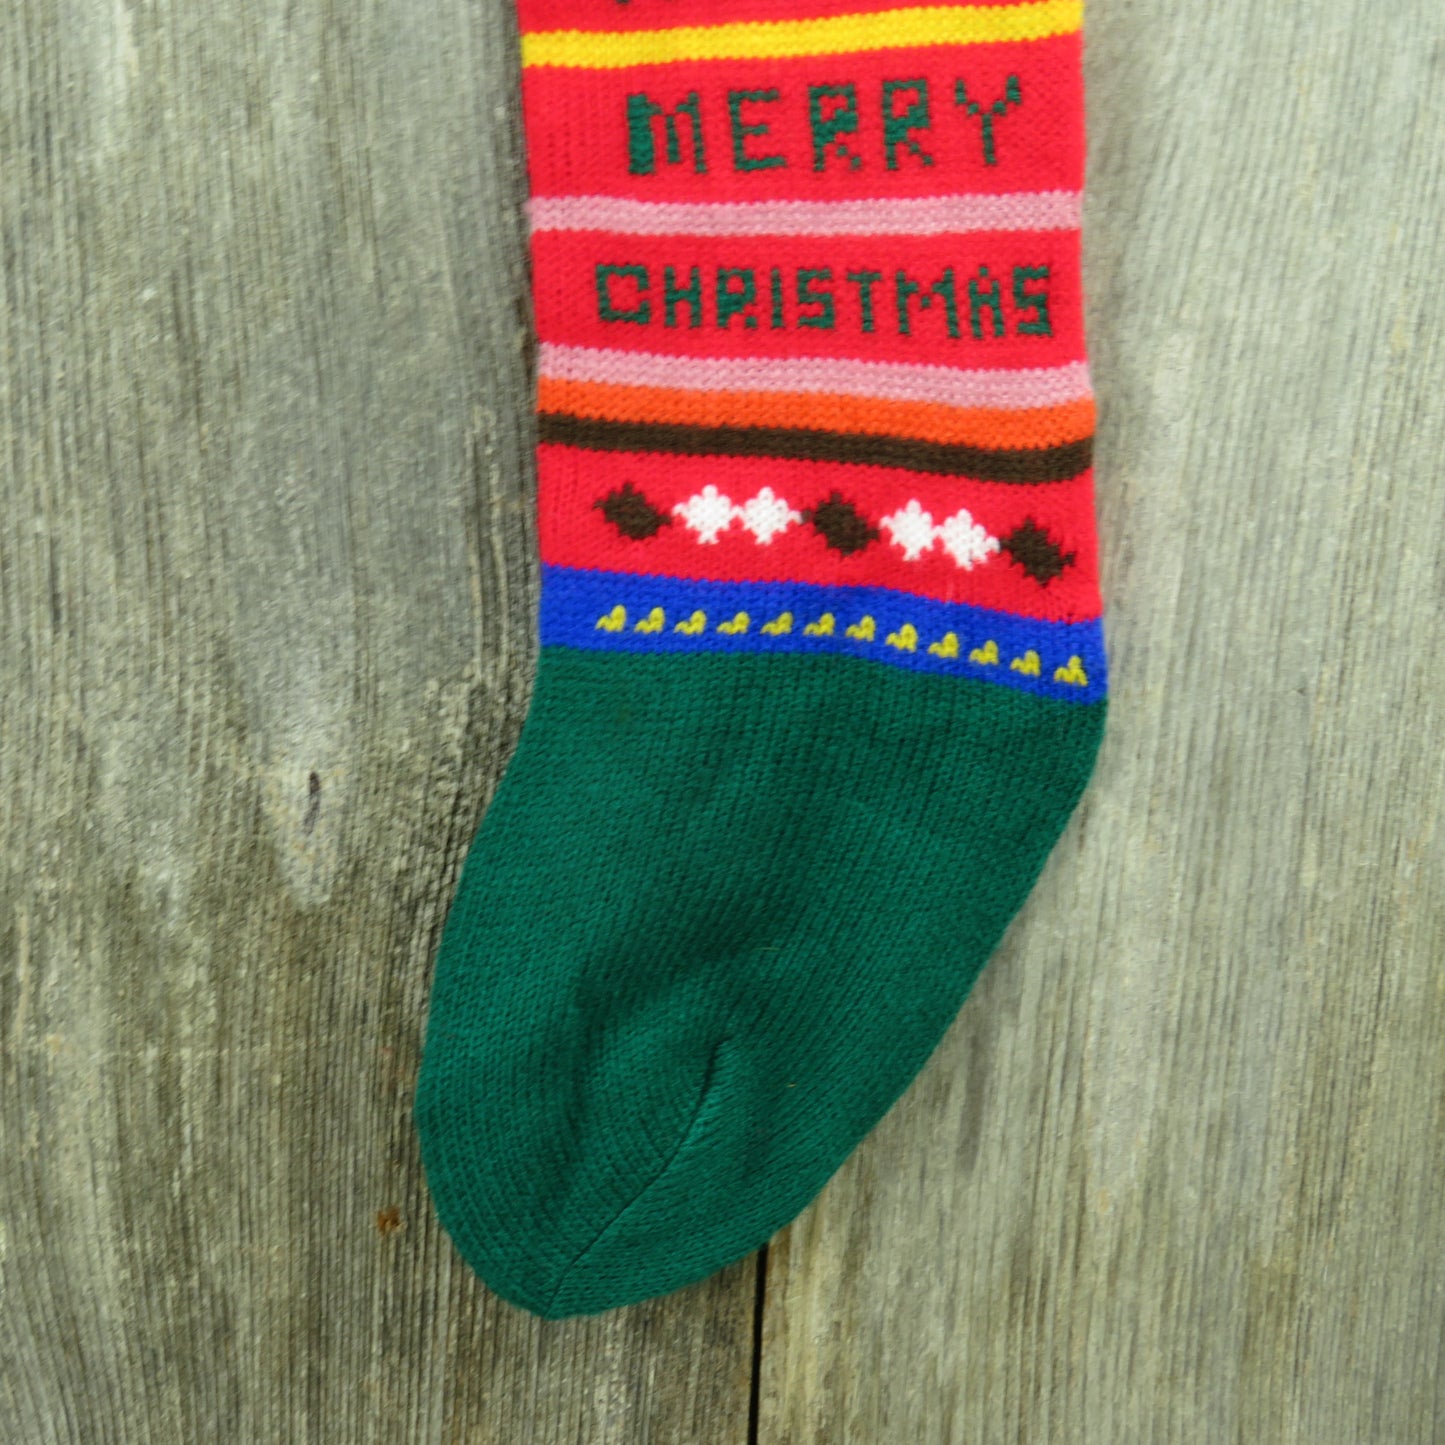 Vintage Merry Christmas Knit Stocking Striped Trees Bold Blue Red Yellow 80s - At Grandma's Table